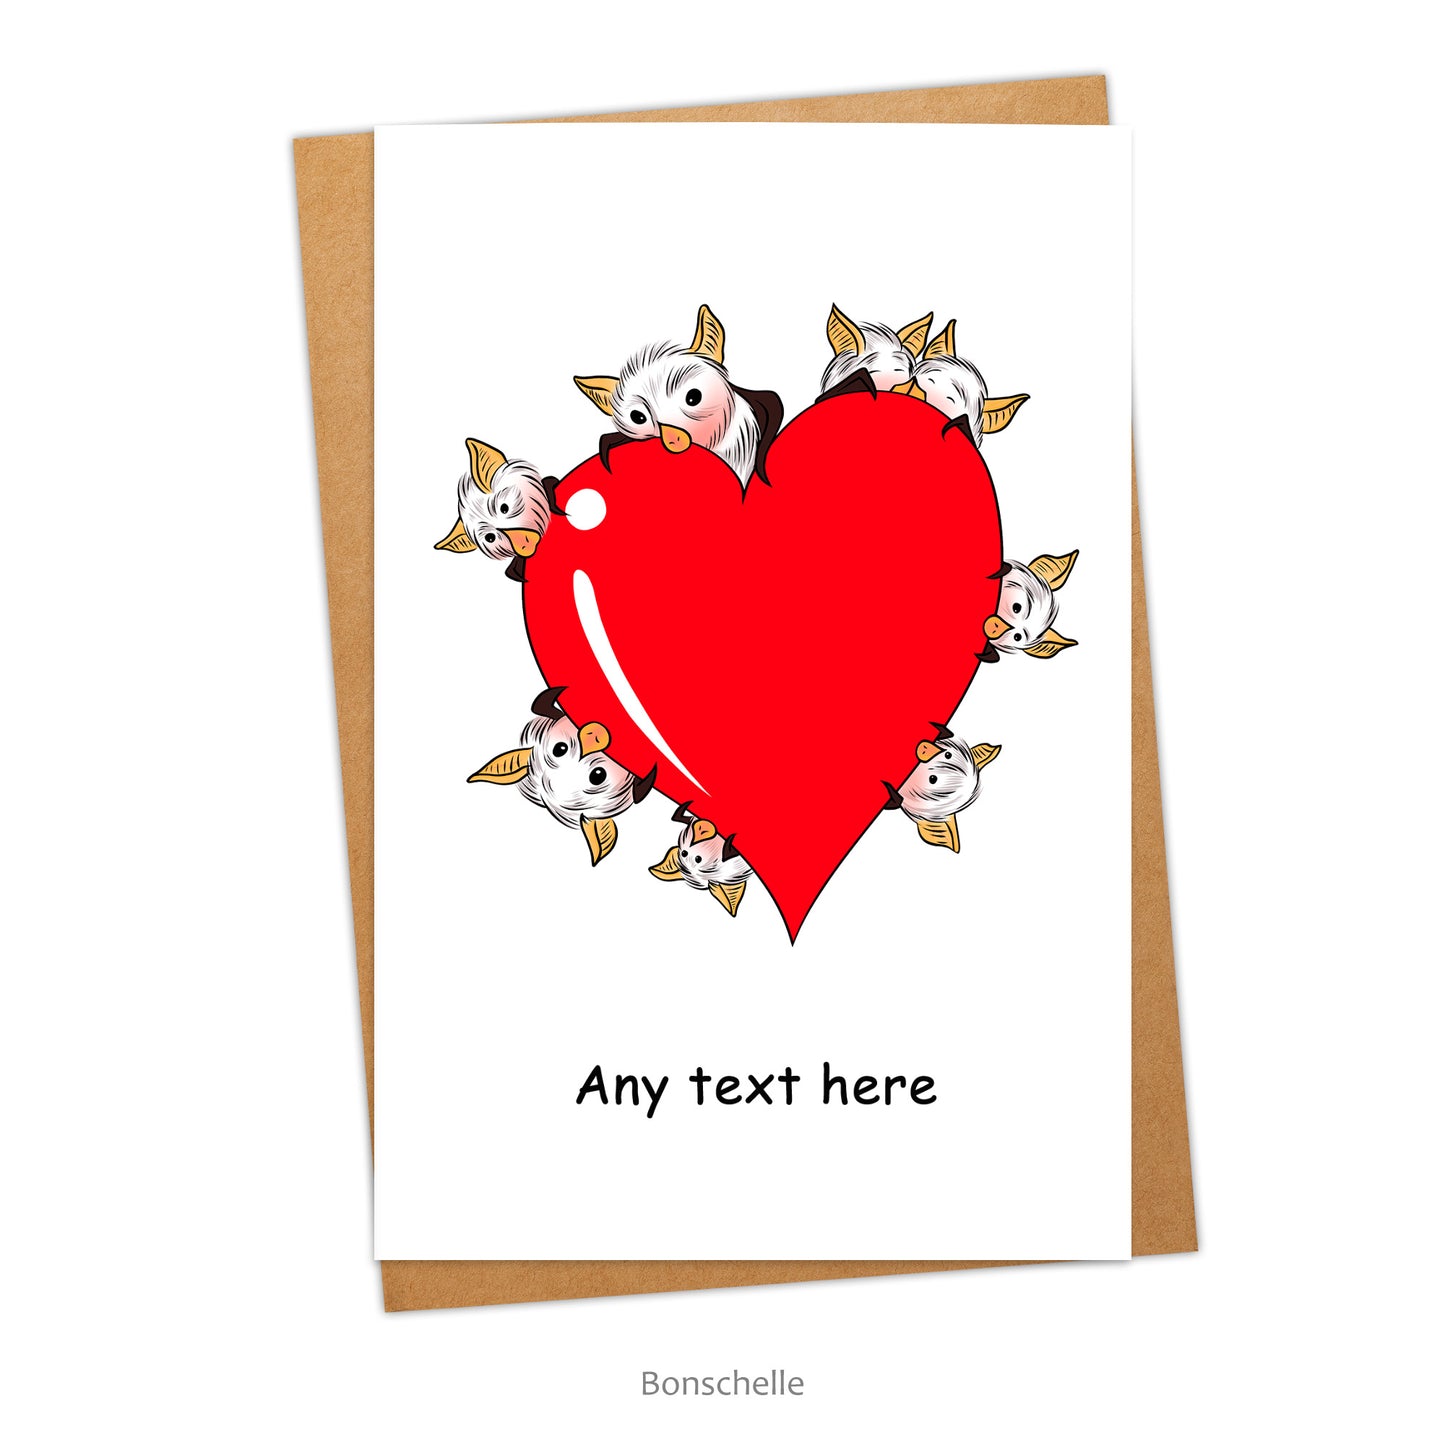 Chibi Bat with Love Heart Card for Valentine's Day, anniversaries or birthdays with a custom message on the front